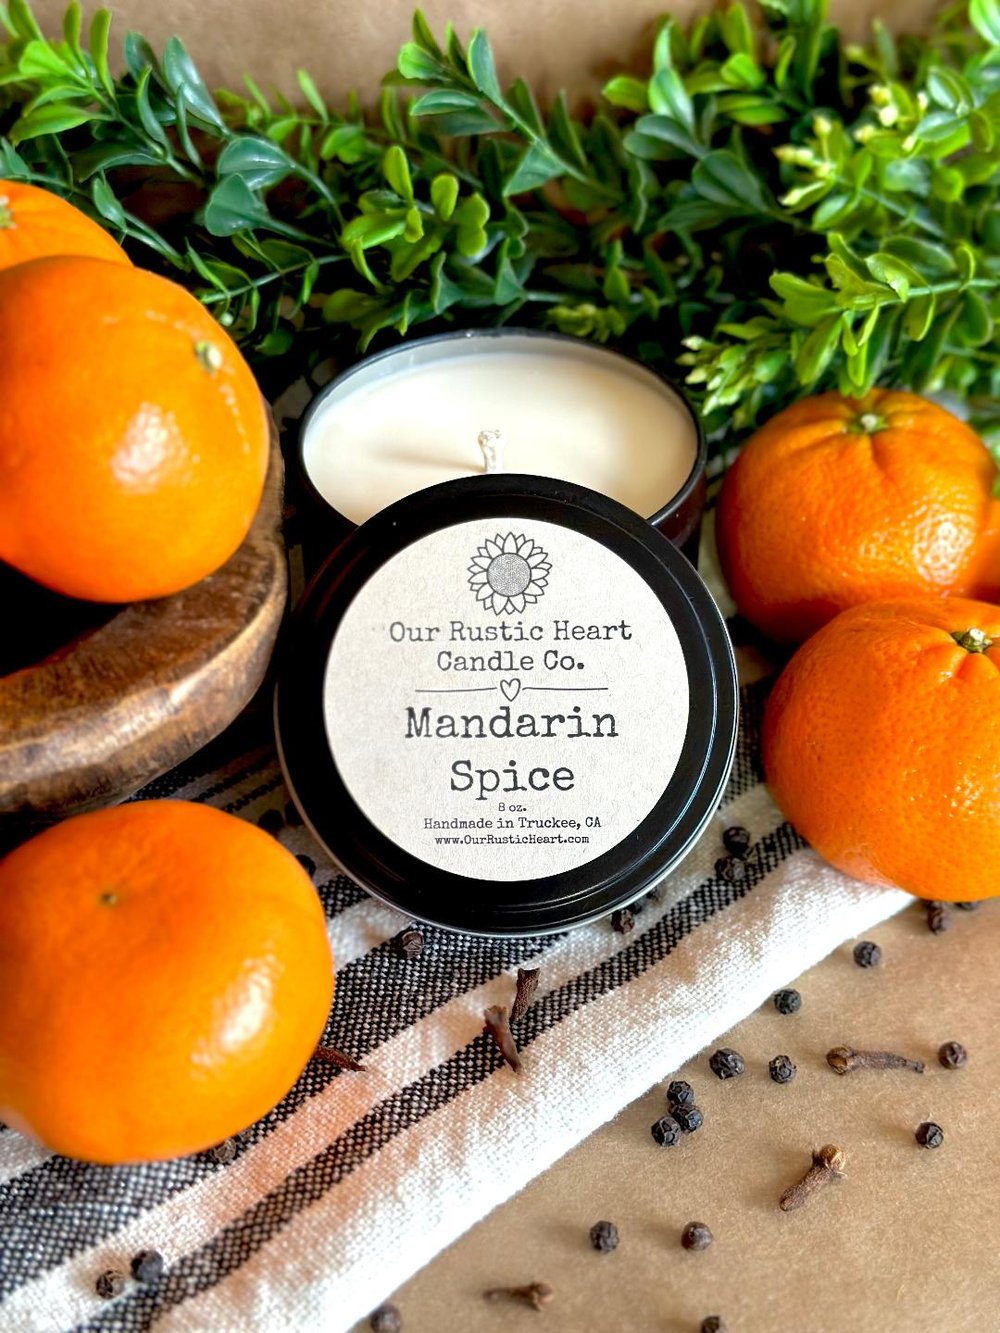 4 Oz Natural Soy Candle Orange Blossom Scented 4 Oz Tin Candle Orange  Scented Candle Orange Blossom Fruit Scented Candle Gift Idea 